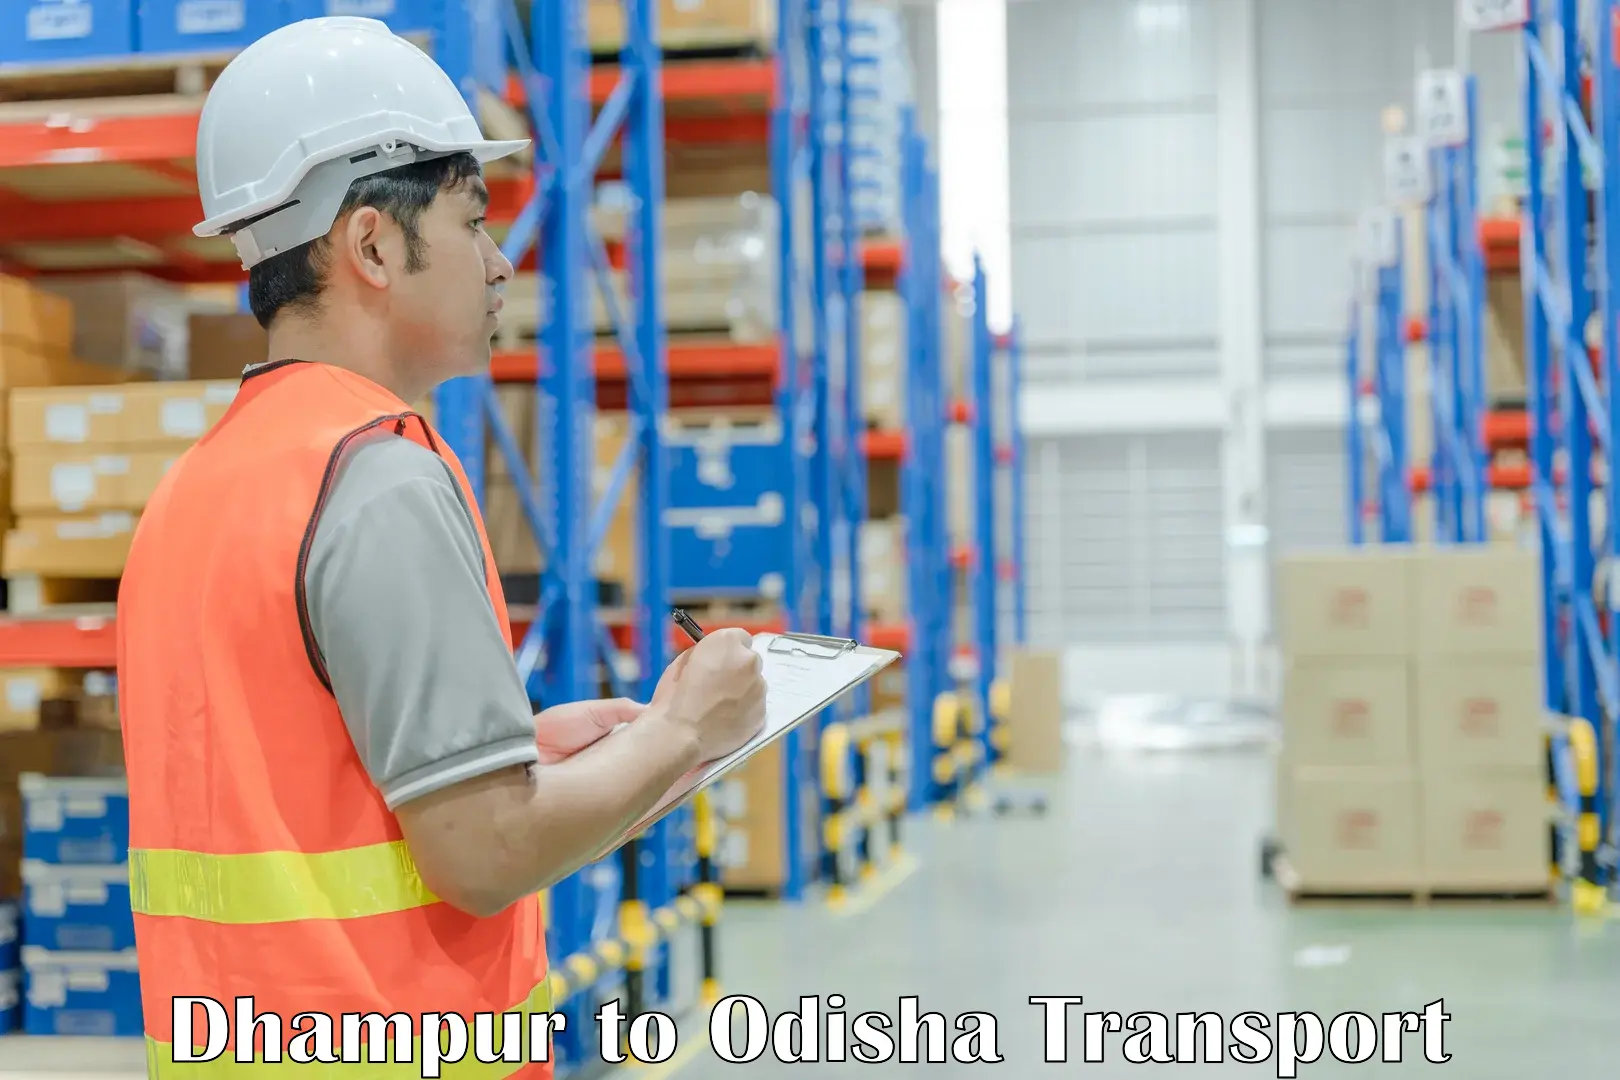 Air freight transport services in Dhampur to Sankerko